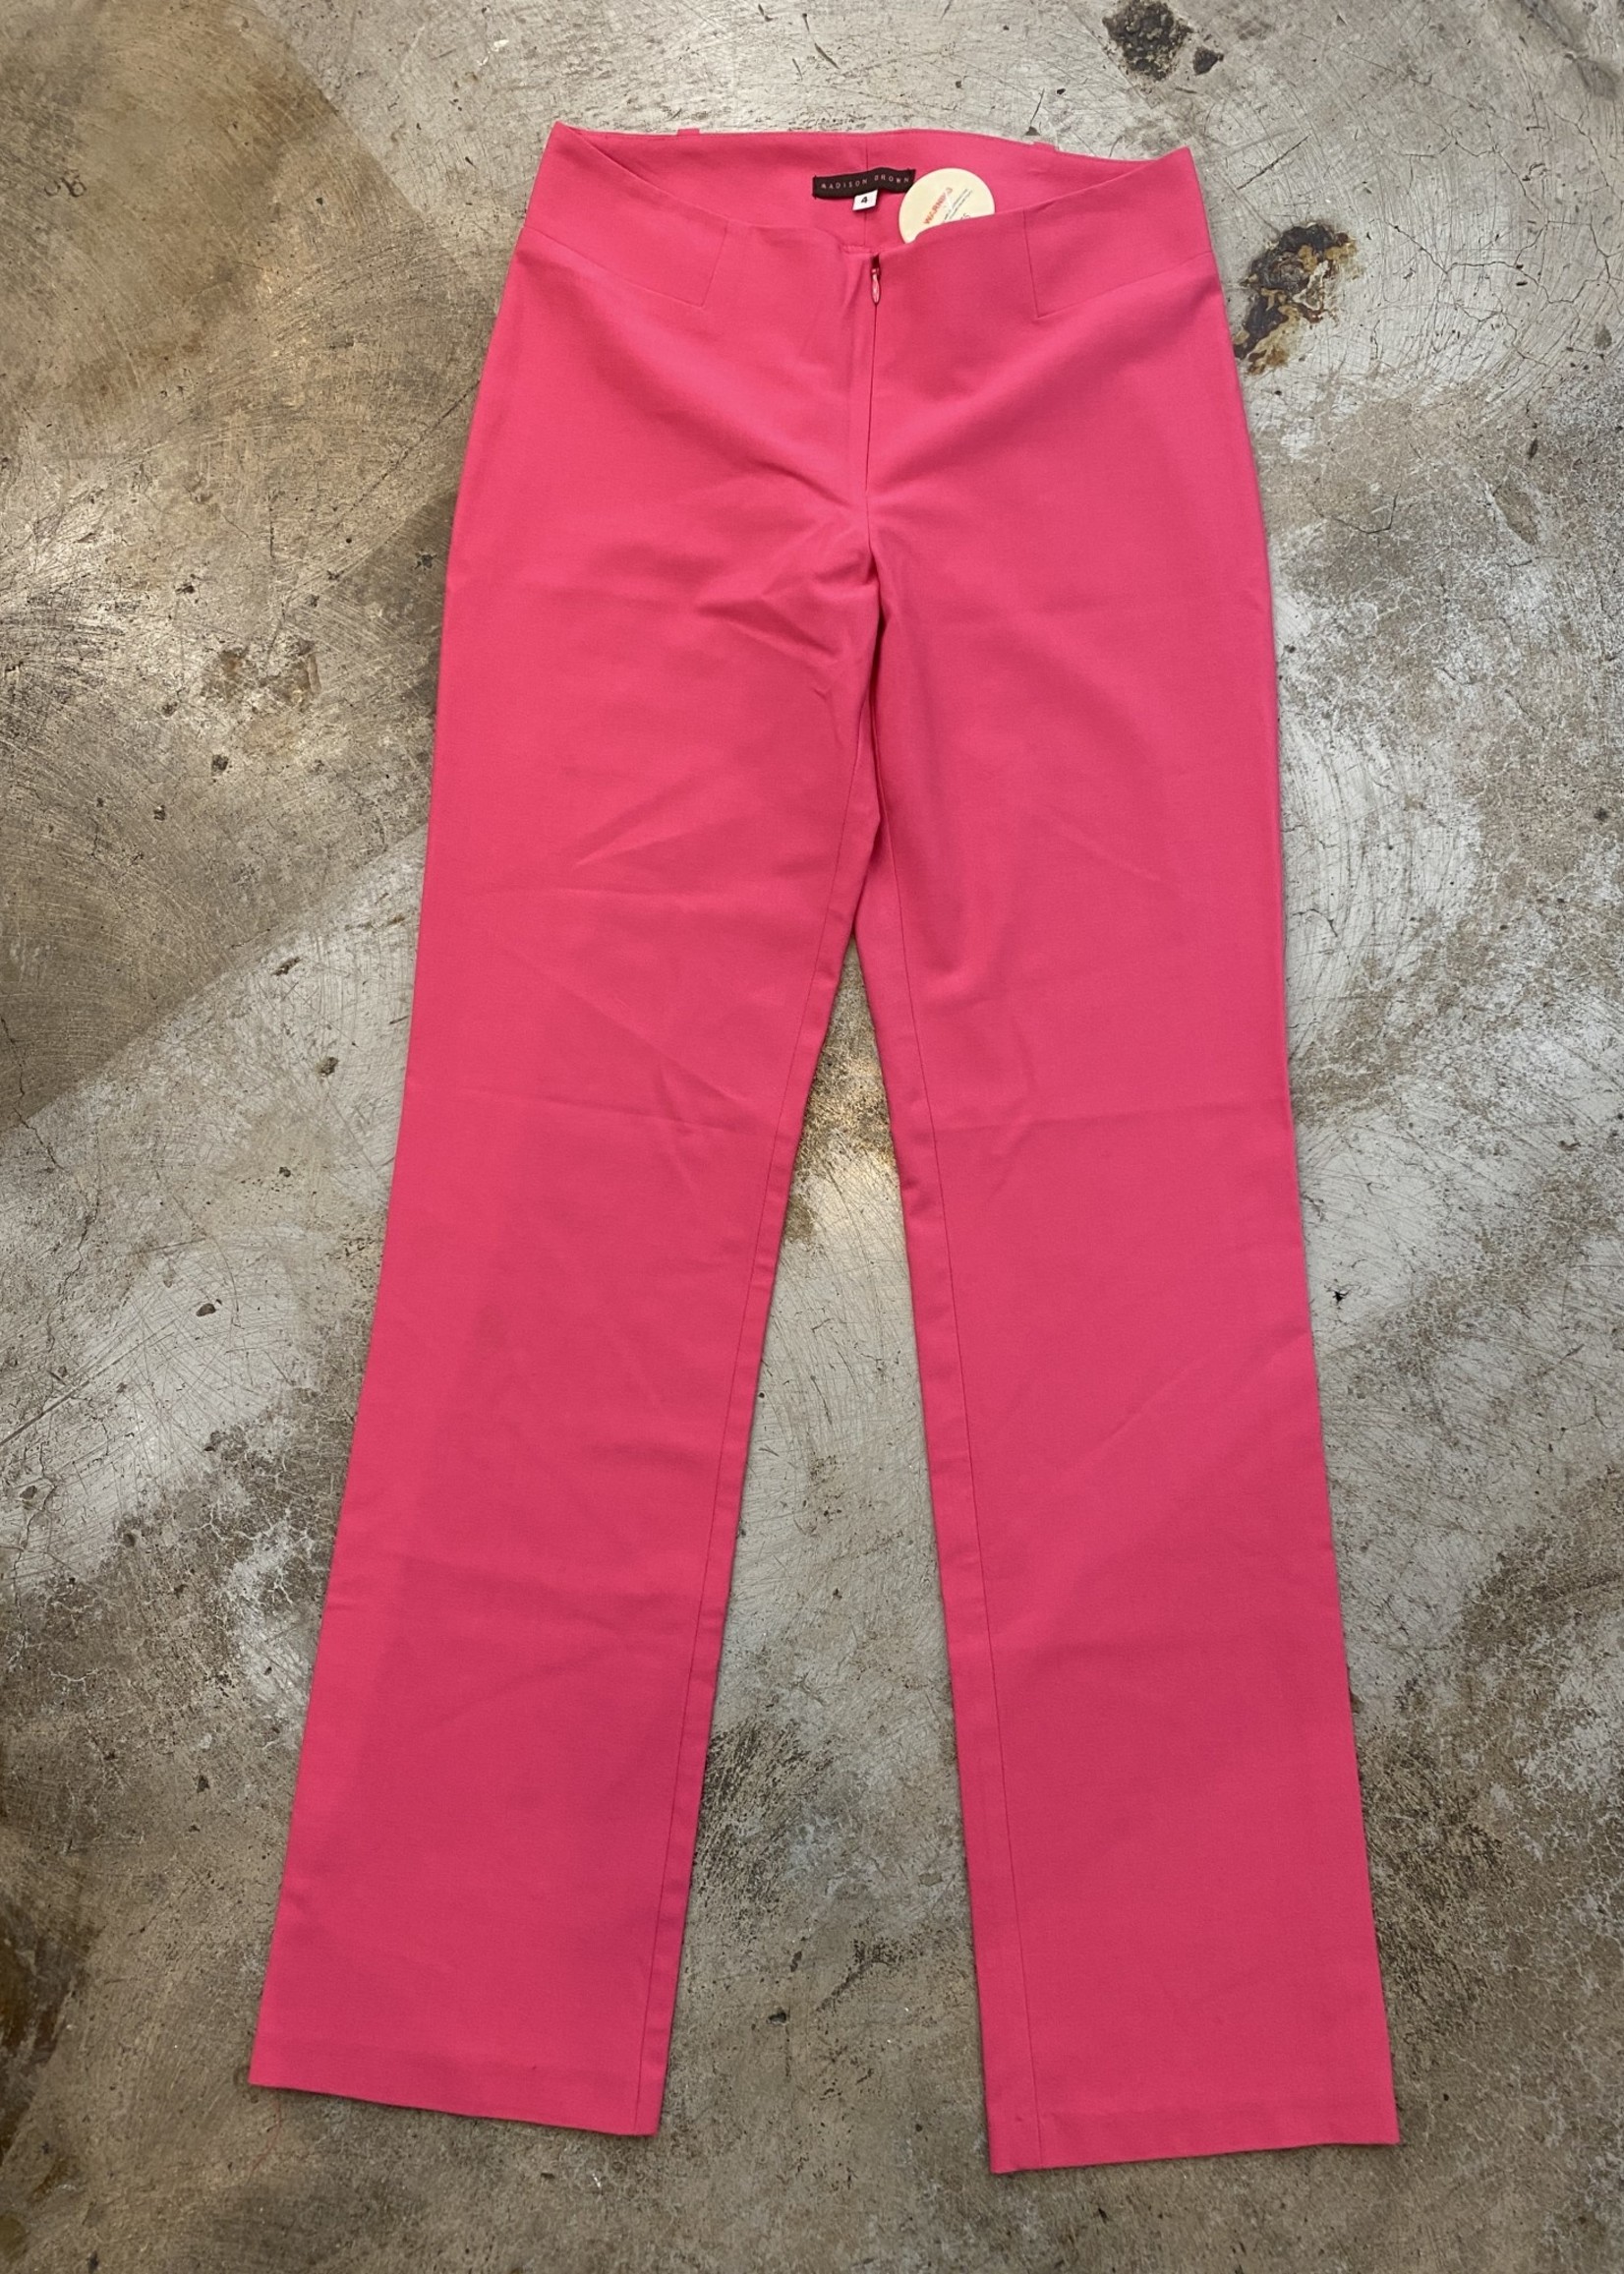 Madison Brown Pink Trousers 4/28"